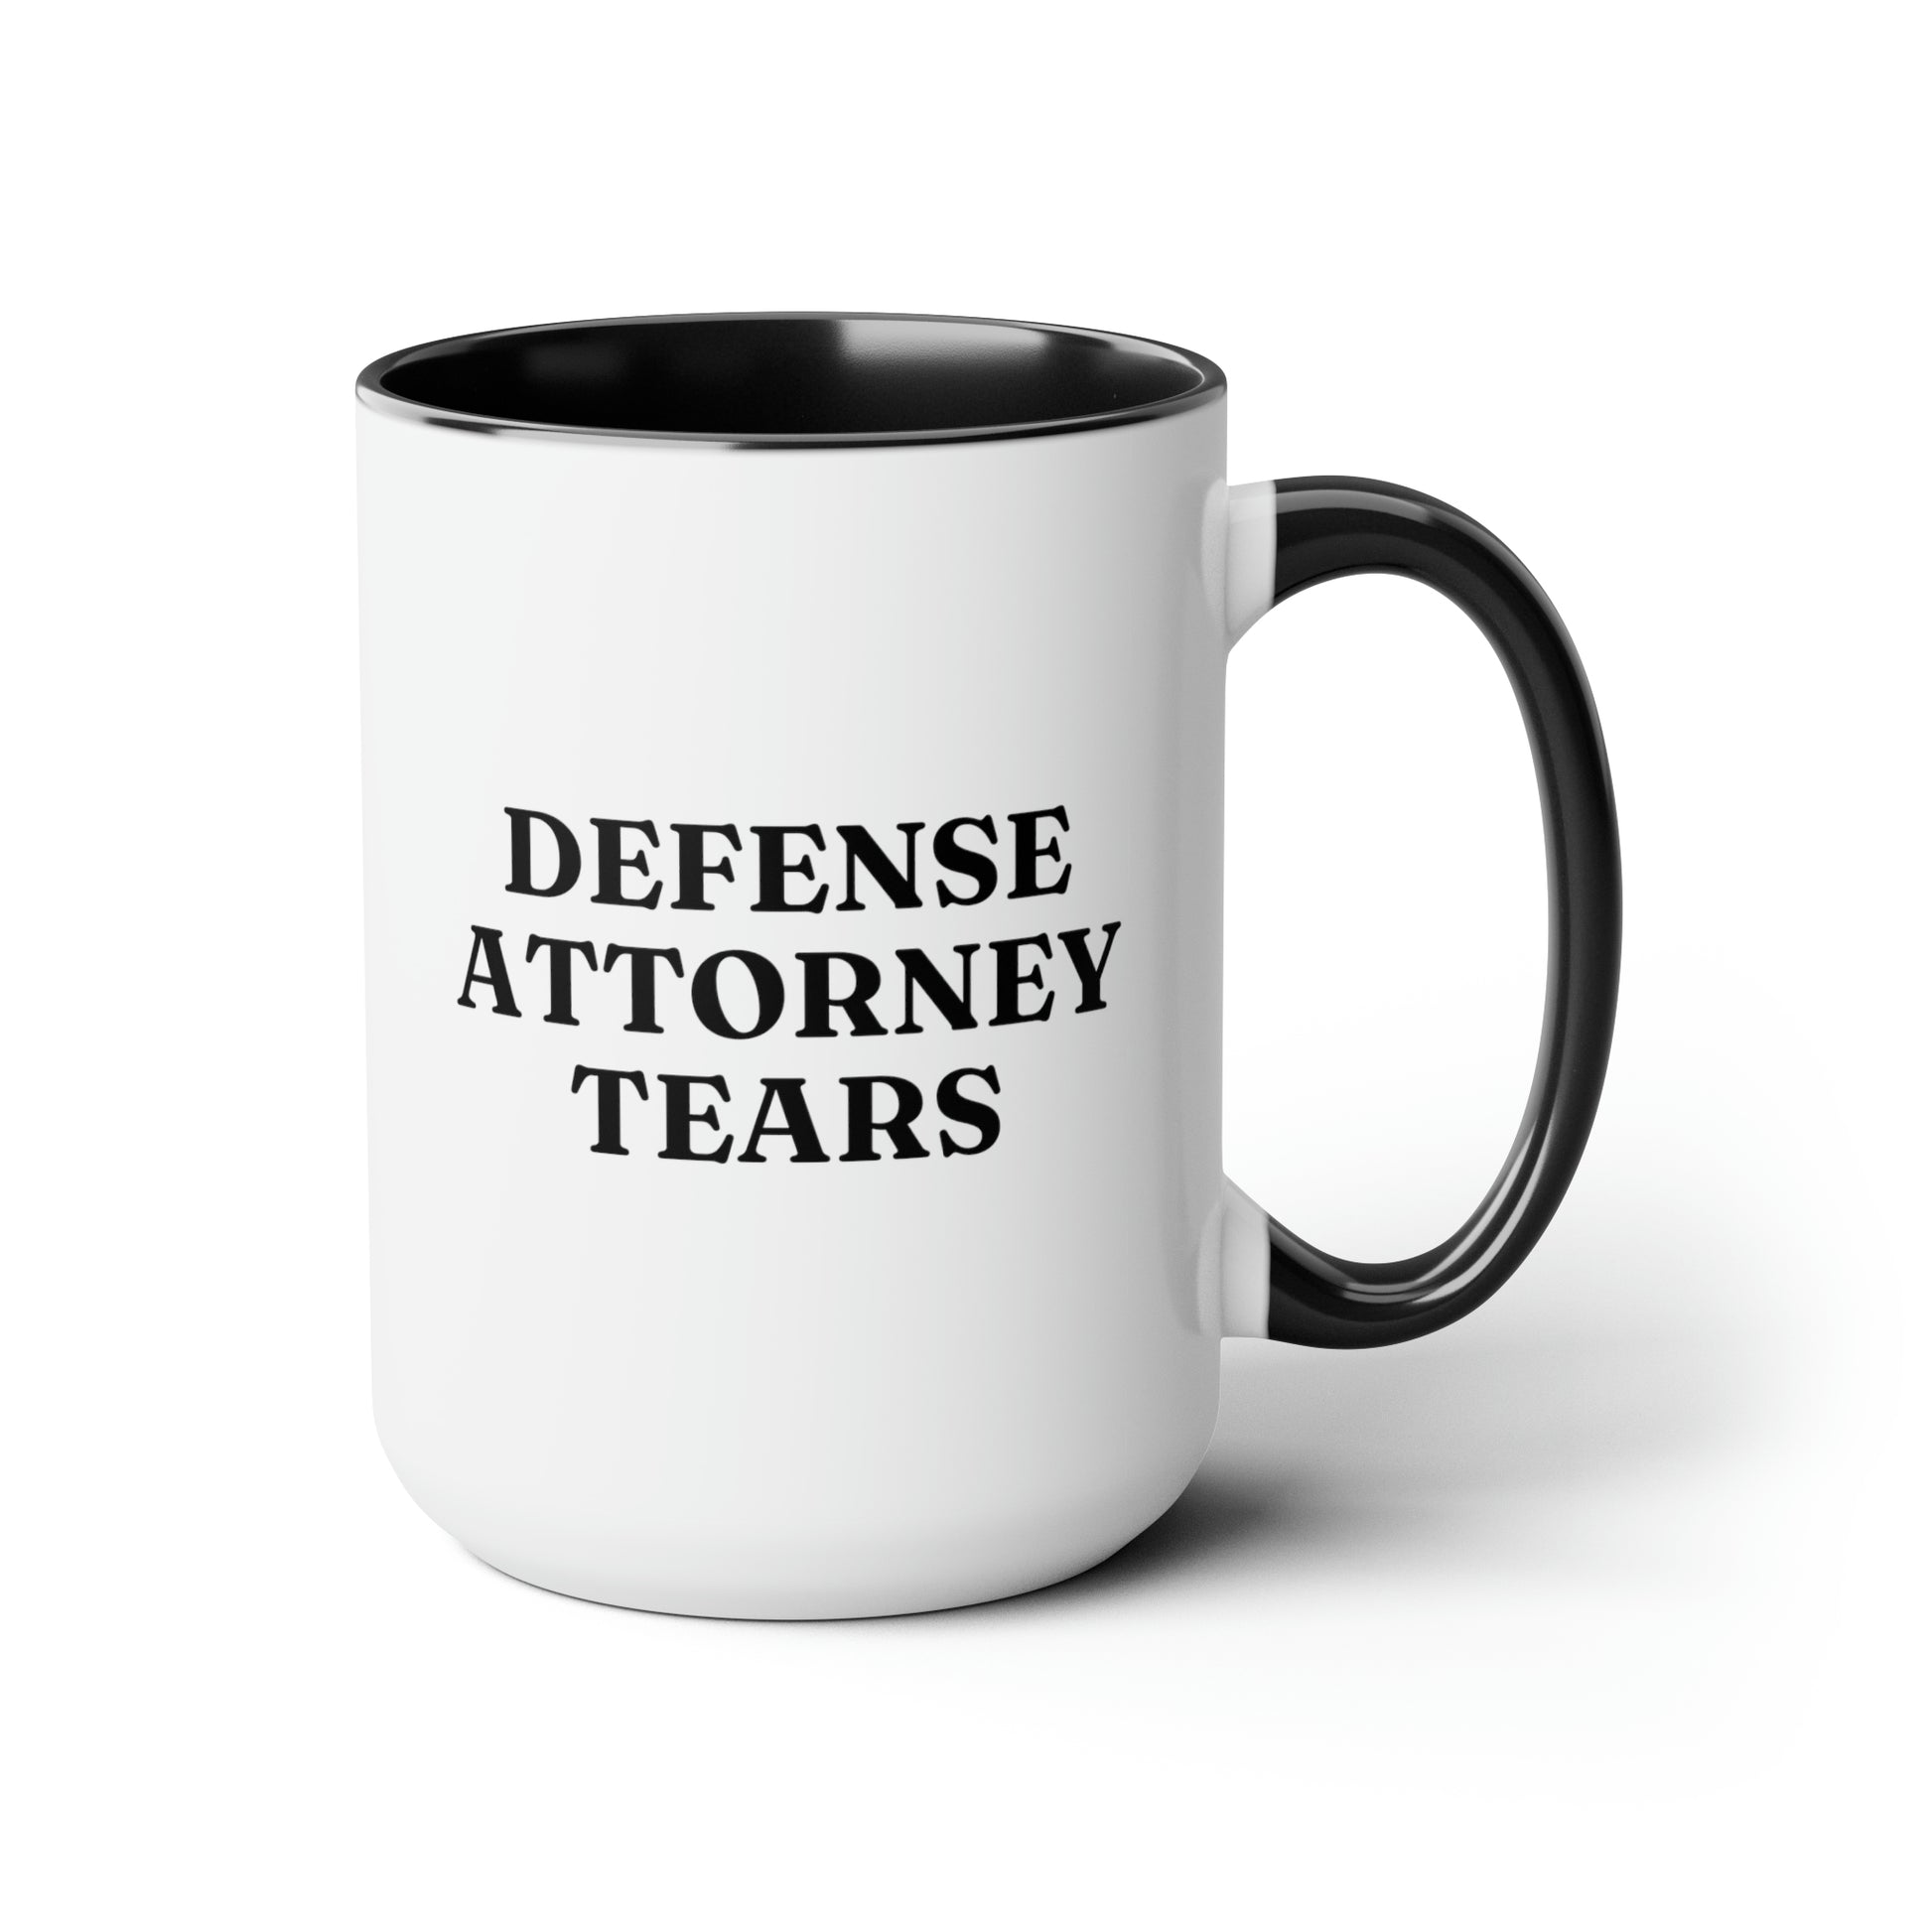 Defense Attorney Tears 15oz white with black accent funny large coffee mug gift for prosecutor lawyer attorney plaintiff cup waveywares wavey wares wavywares wavy wares